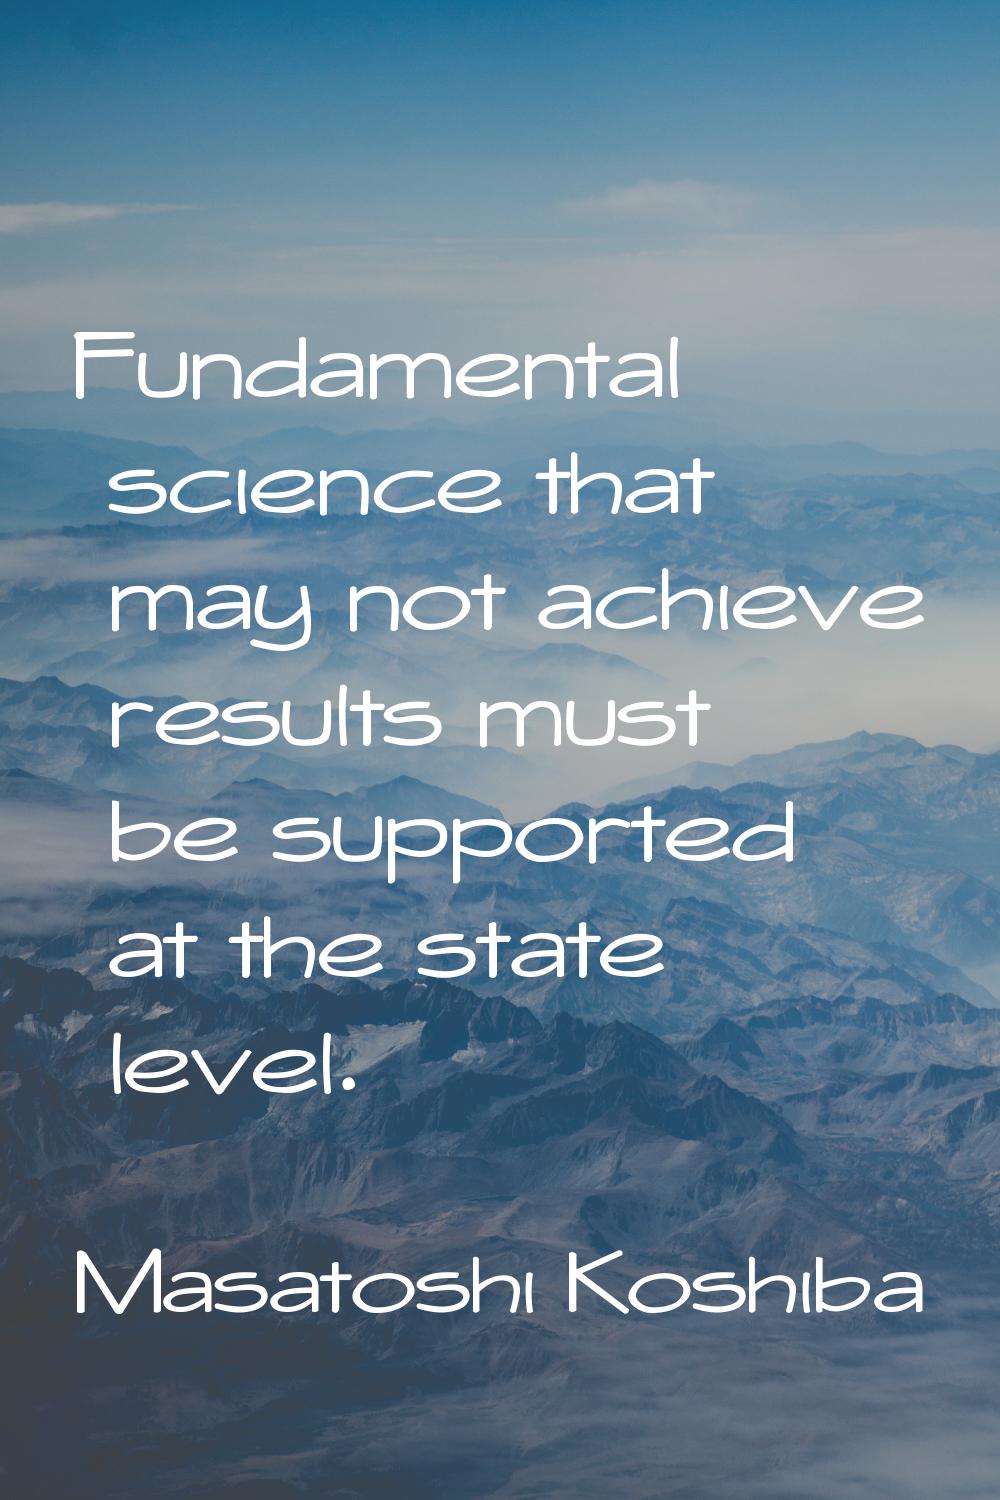 Fundamental science that may not achieve results must be supported at the state level.